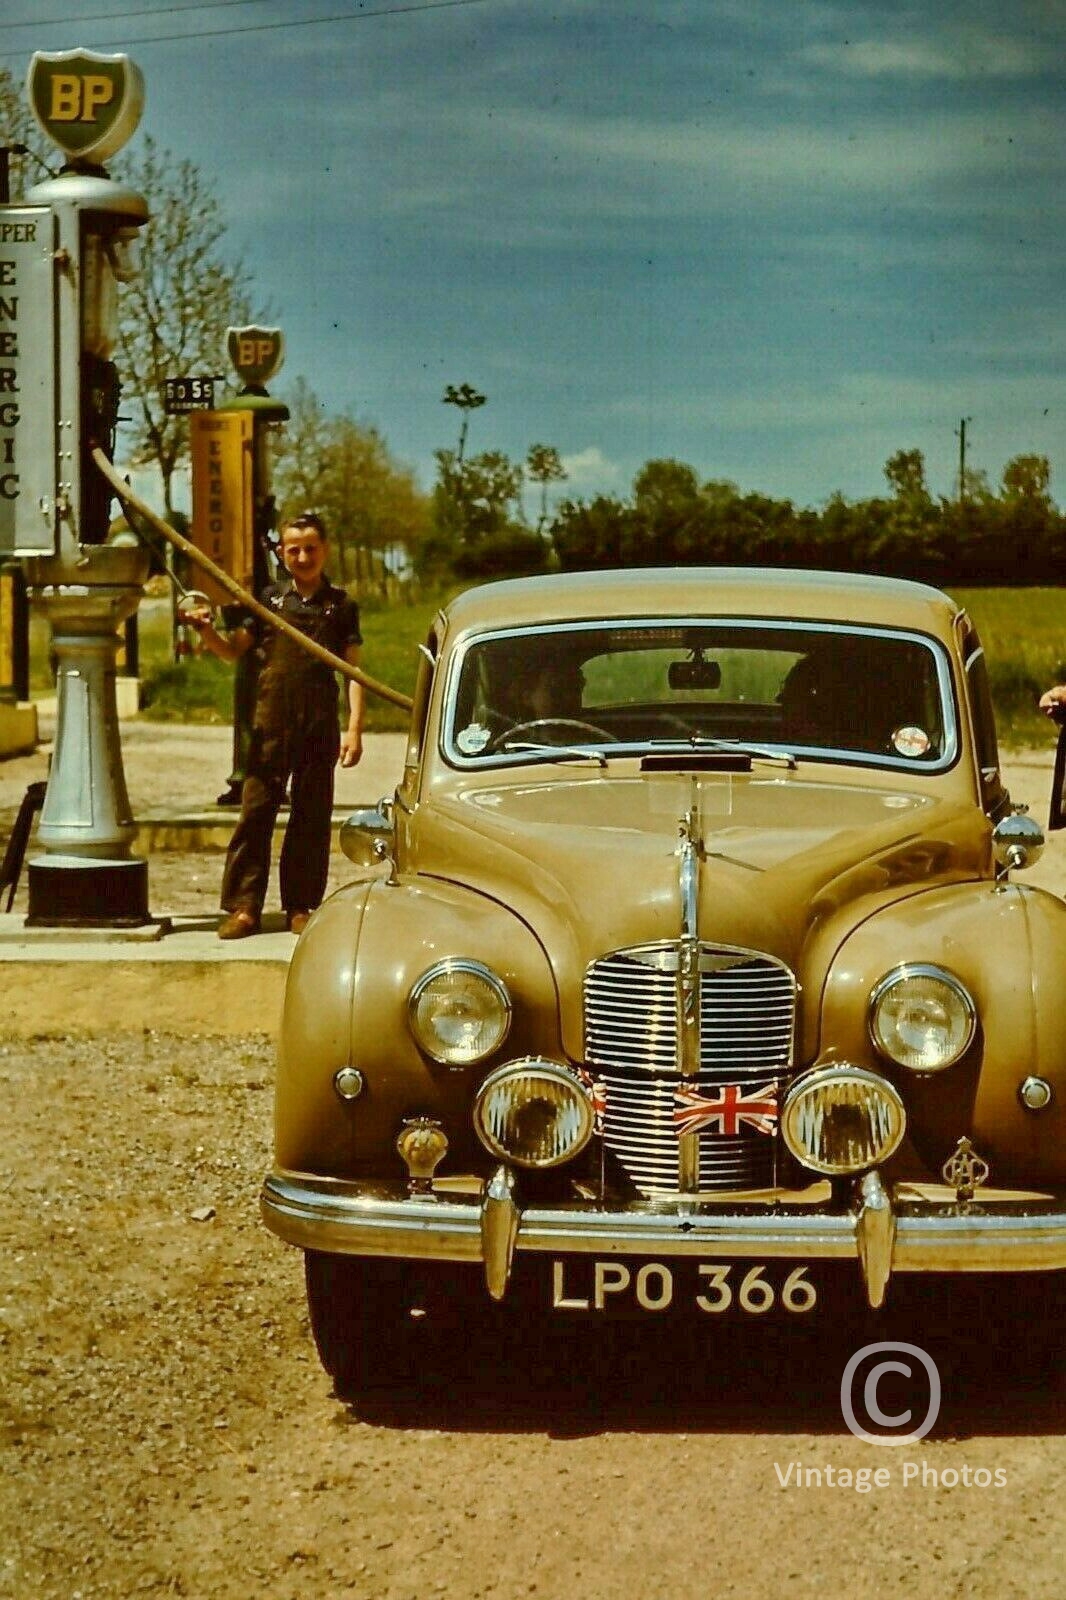 1950s Classic Austin A70 Hampshire, Saloon at BP Filling Station